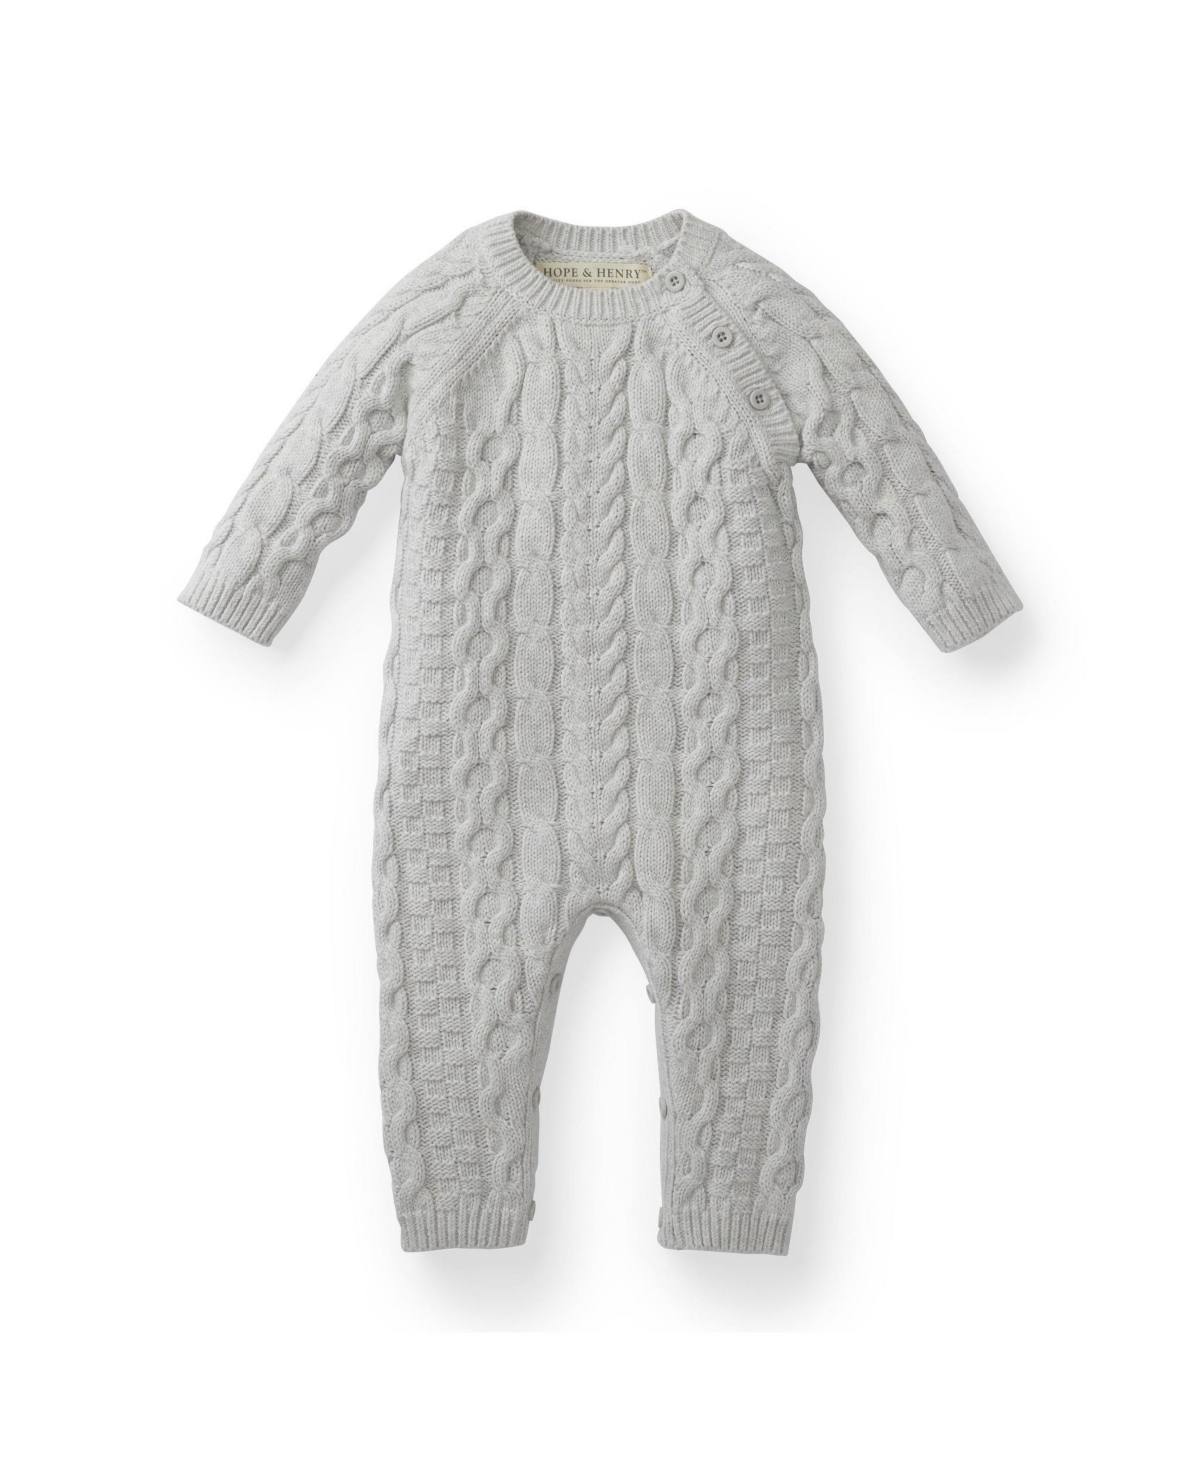 Baby Boys or Baby Girls Hope Henry Cable Knit Sweater Romper